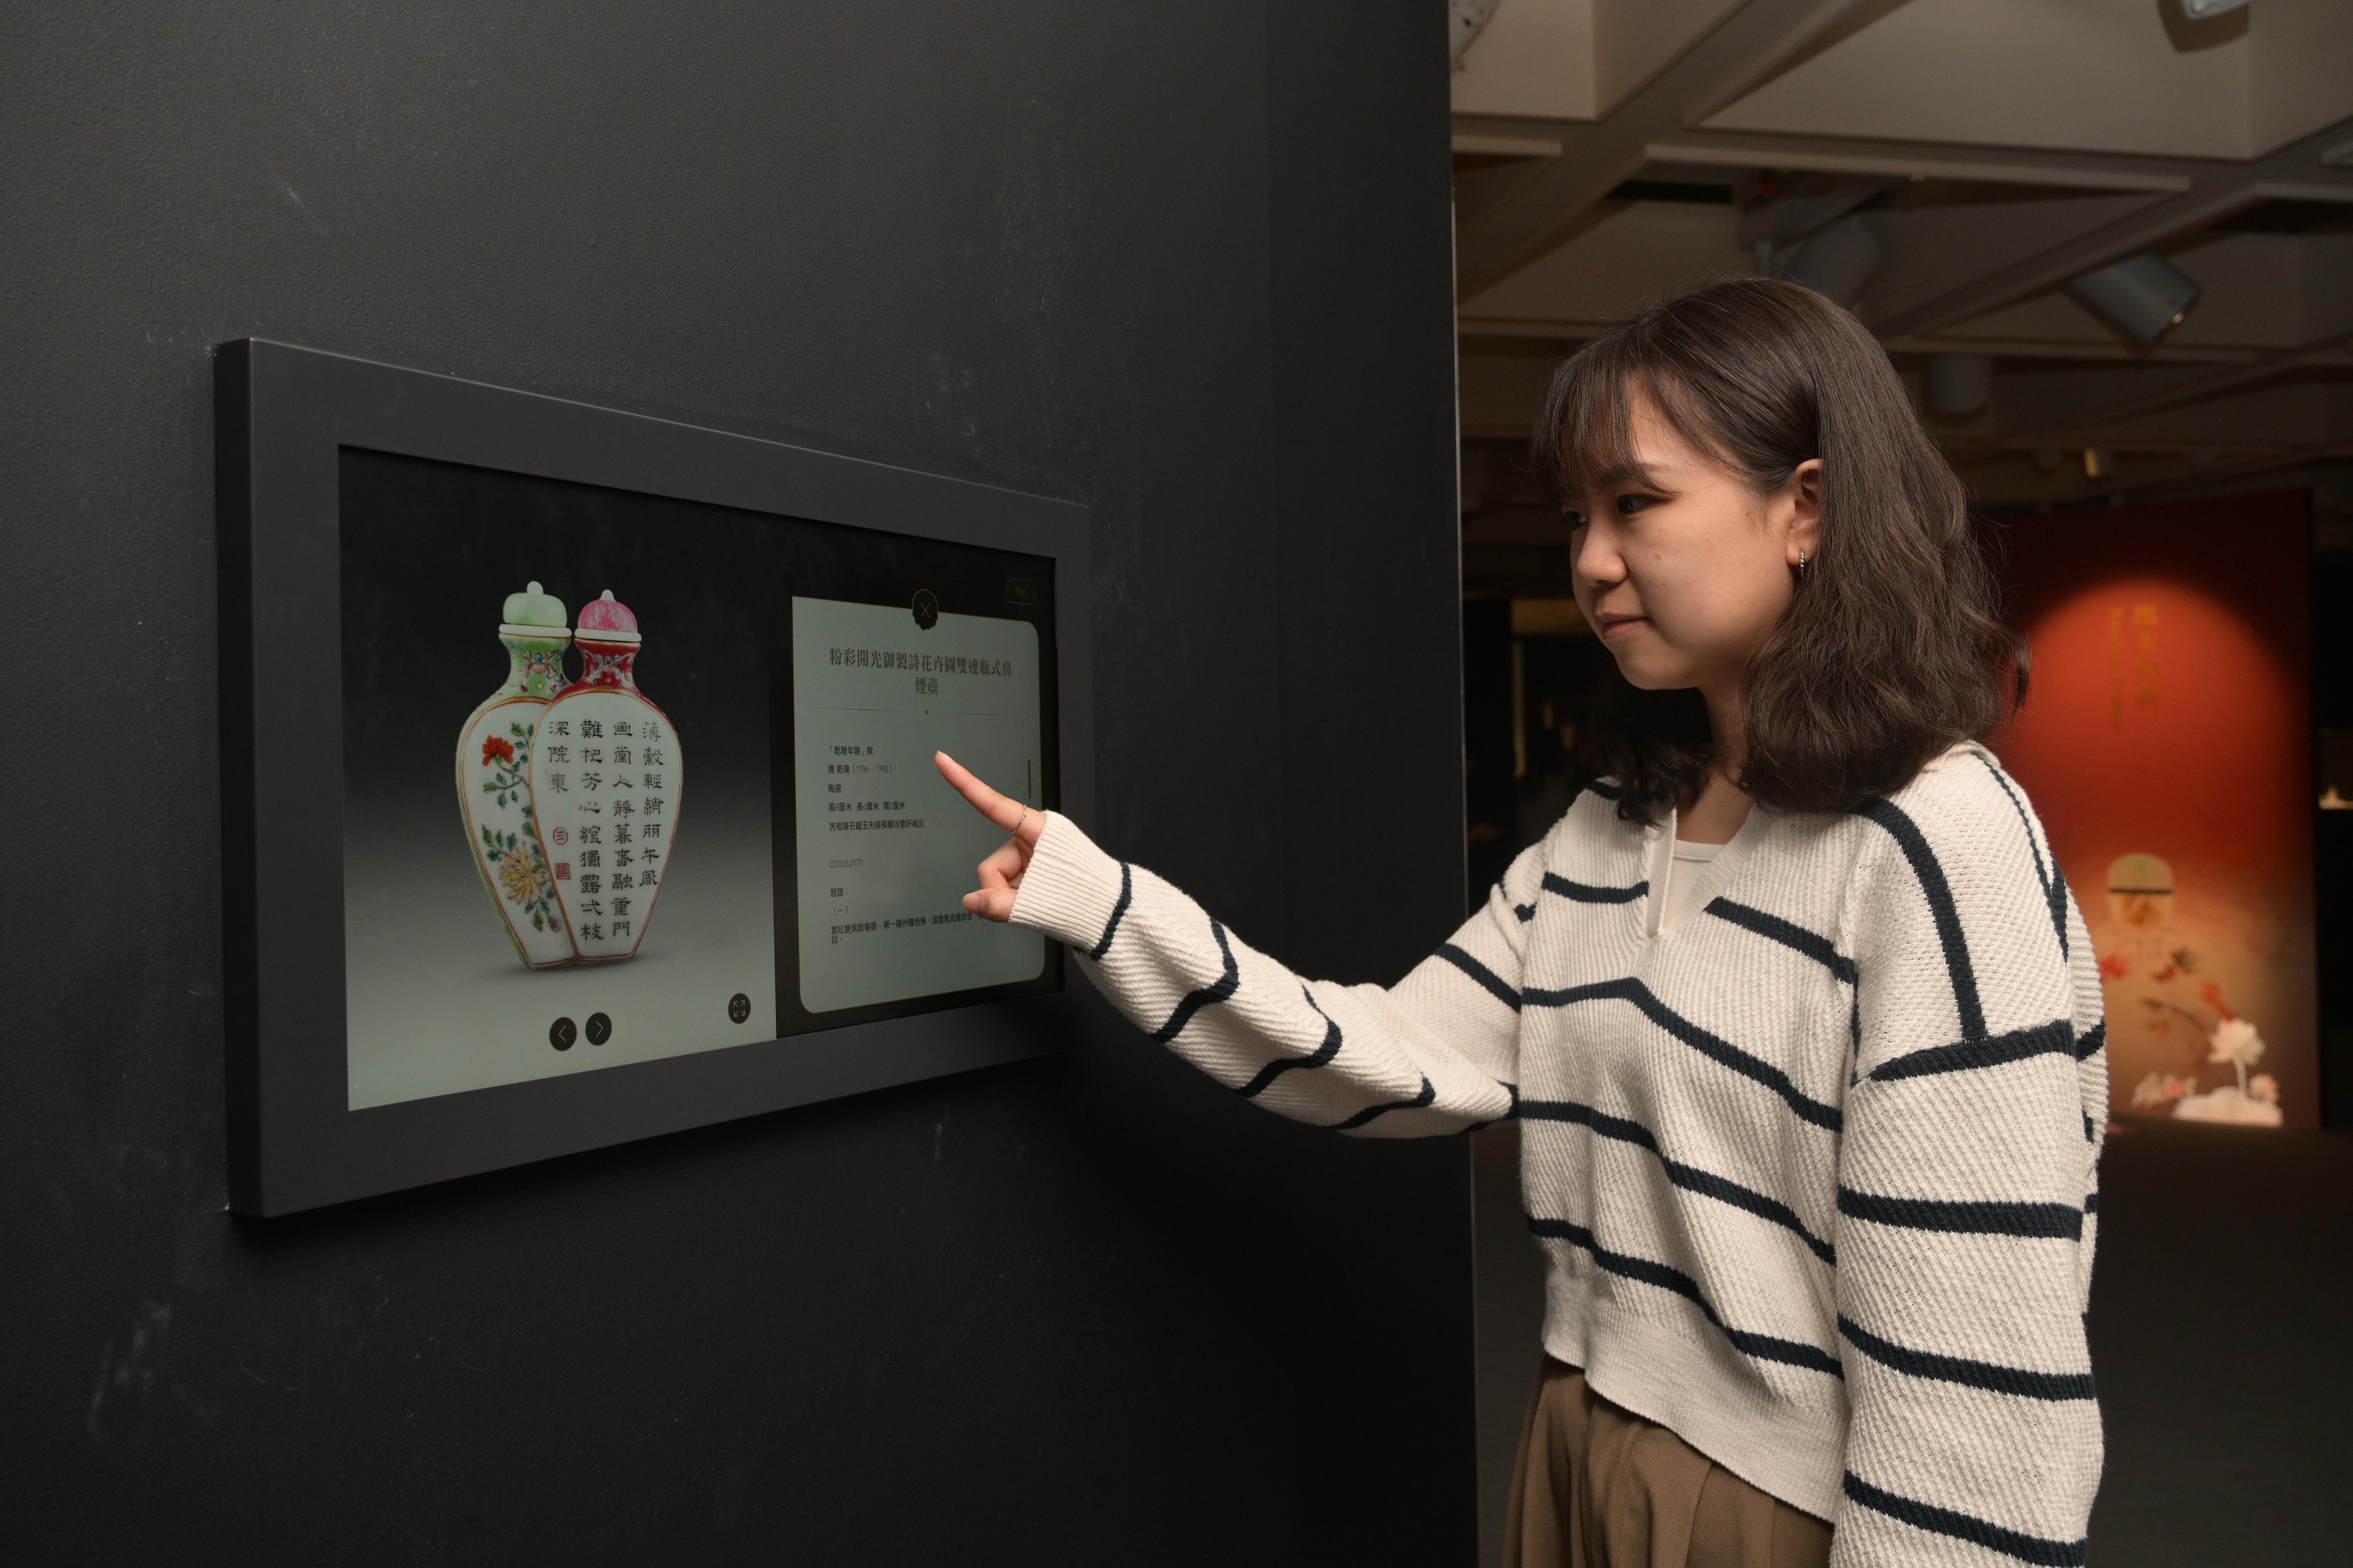 The opening ceremony of the "Art of Gifting: The Fuyun Xuan Collection of Chinese Snuff Bottles" exhibition and donation ceremony was held today (April 11) at the Hong Kong Museum of Art. Photo shows an interactive installation at the gallery, enabling the audience to access details and close-up images of exhibits.